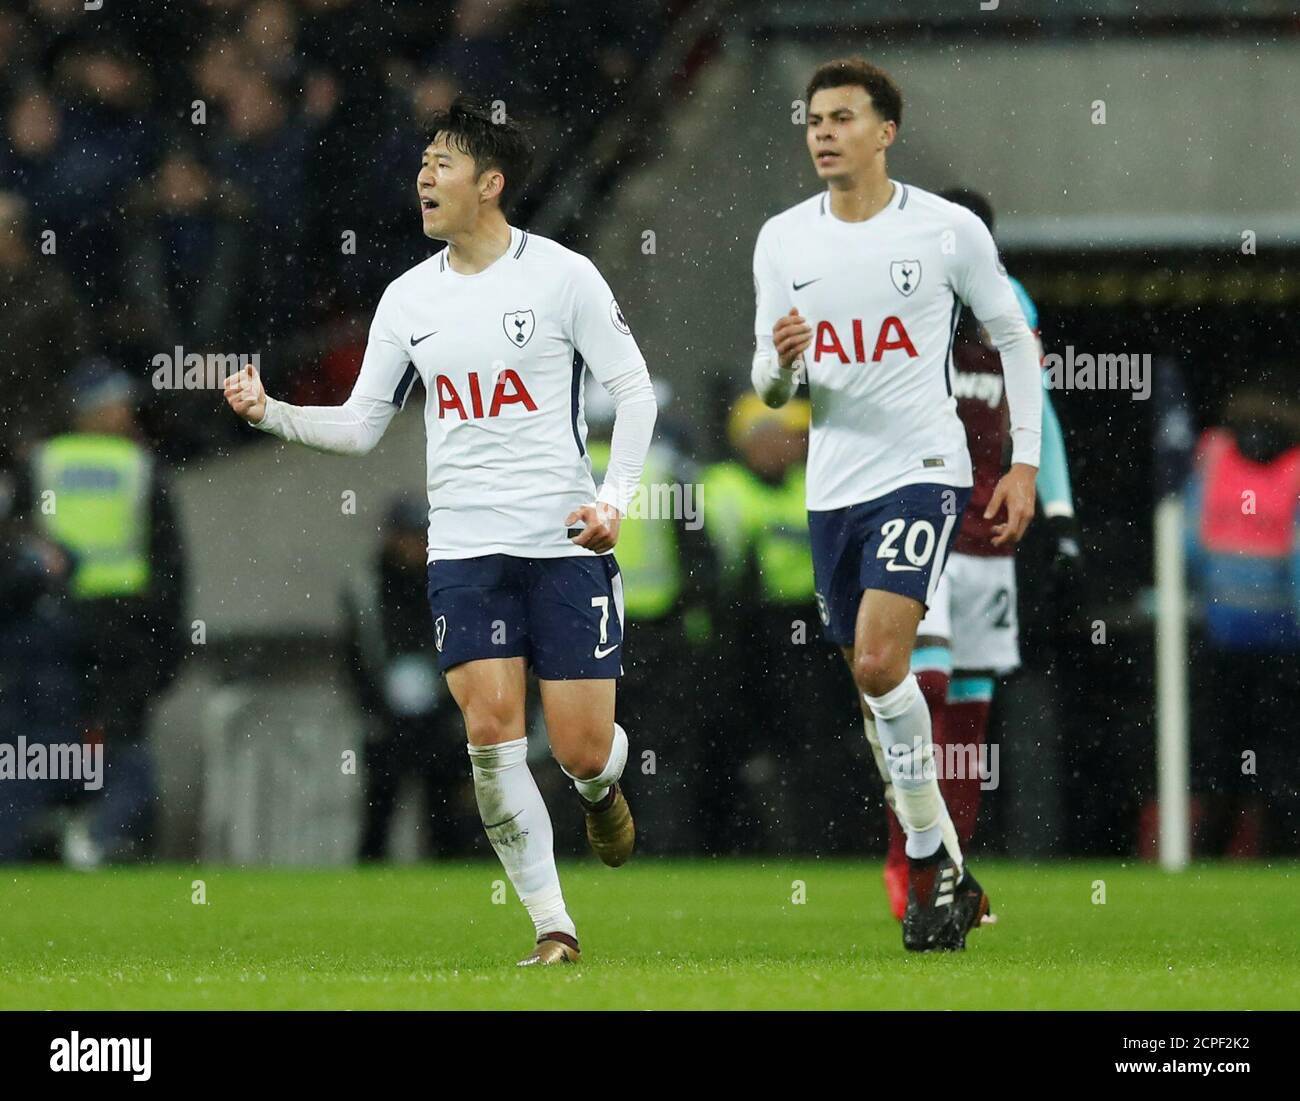 Soccer Football - Premier League - Tottenham Hotspur vs West Ham United - Wembley Stadium, London, Britain - January 4, 2018   Tottenham's Son Heung-min celebrates scoring their first goal with Dele Alli   REUTERS/Eddie Keogh    EDITORIAL USE ONLY. No use with unauthorized audio, video, data, fixture lists, club/league logos or 'live' services. Online in-match use limited to 75 images, no video emulation. No use in betting, games or single club/league/player publications.  Please contact your account representative for further details. Stock Photo